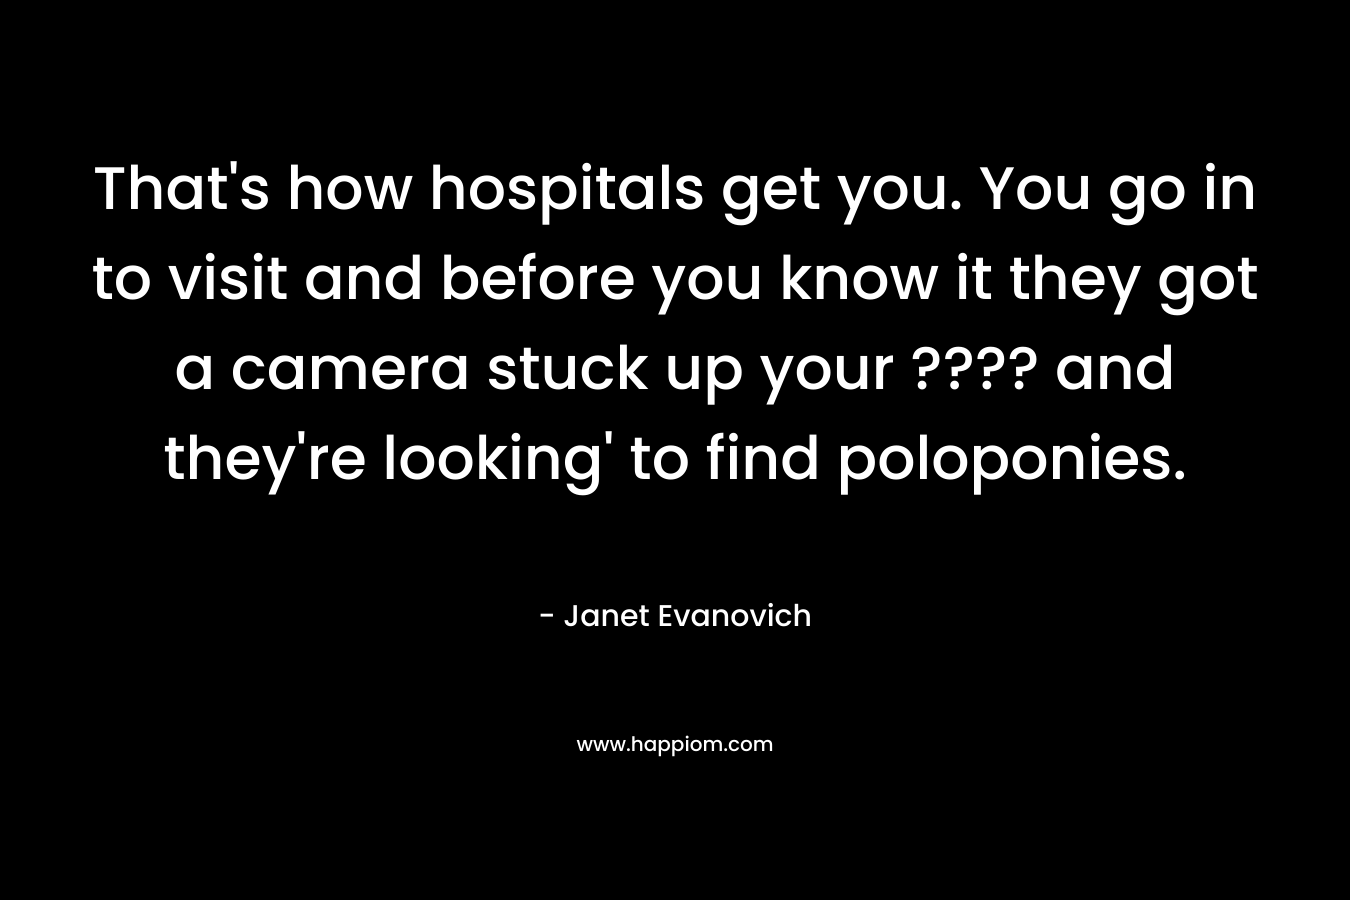 That’s how hospitals get you. You go in to visit and before you know it they got a camera stuck up your ???? and they’re looking’ to find poloponies. – Janet Evanovich